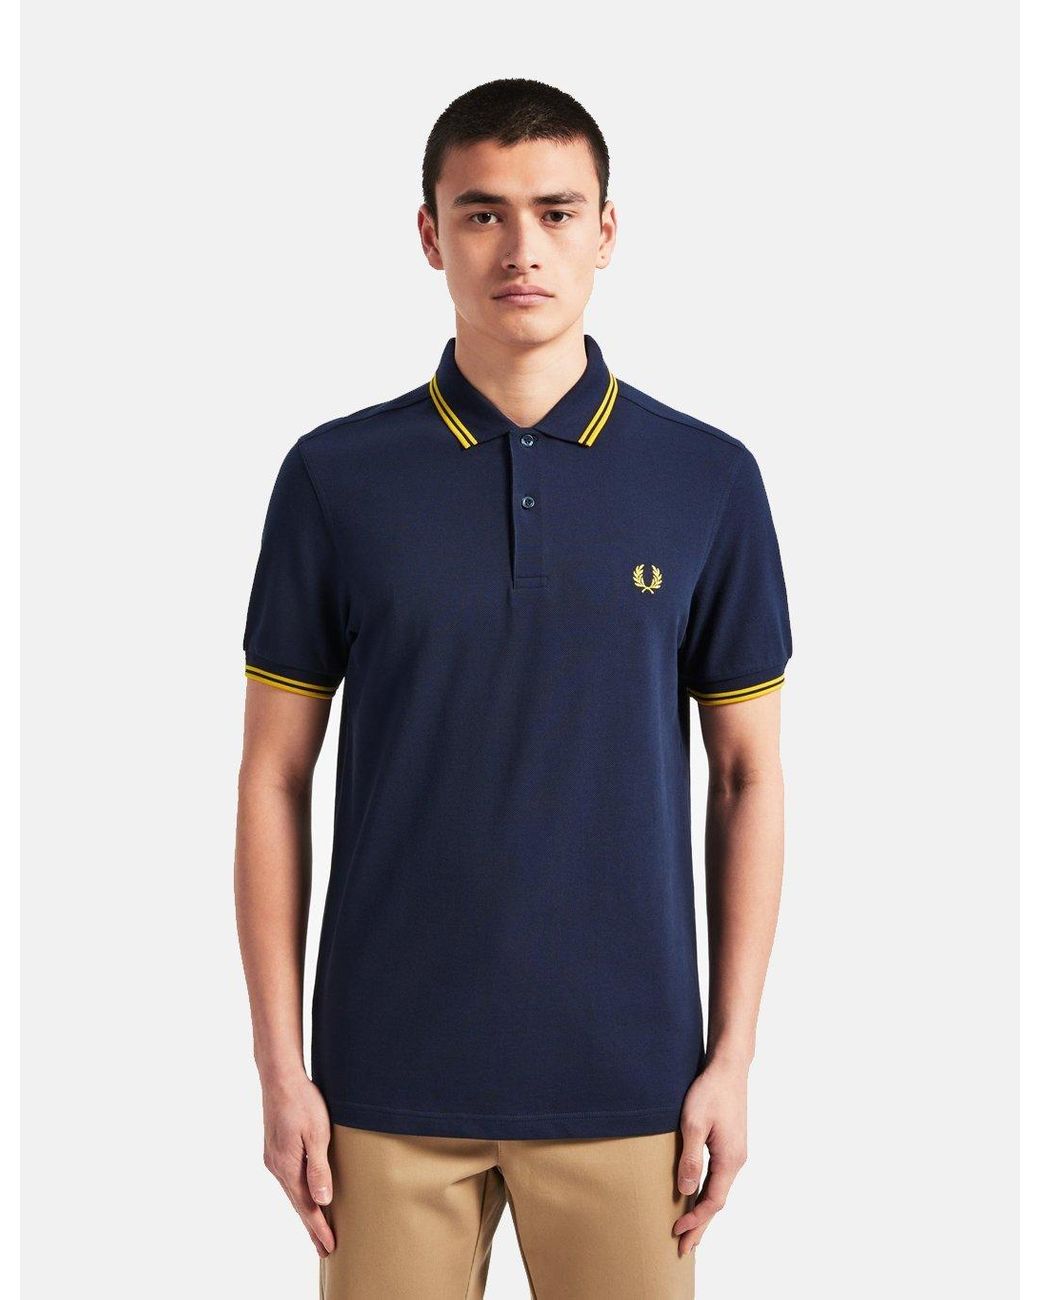 Fred Perry Cotton Twin Tipped Polo Shirt in Navy Blue (Blue) for Men - Lyst